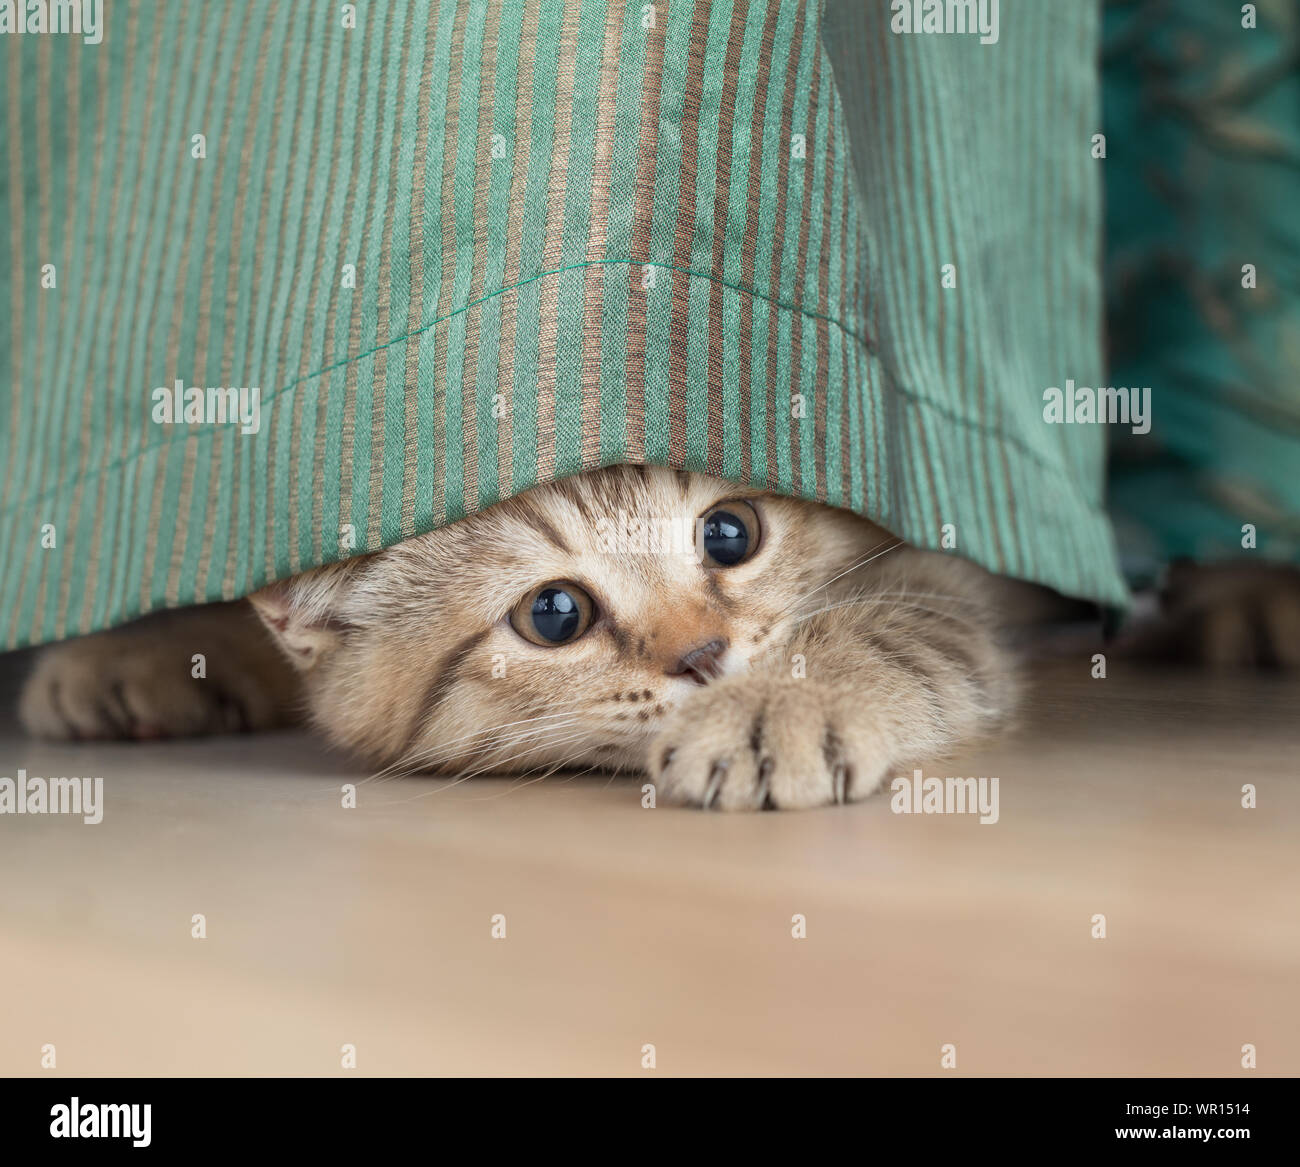 funny cat stealing under green portiere Stock Photo